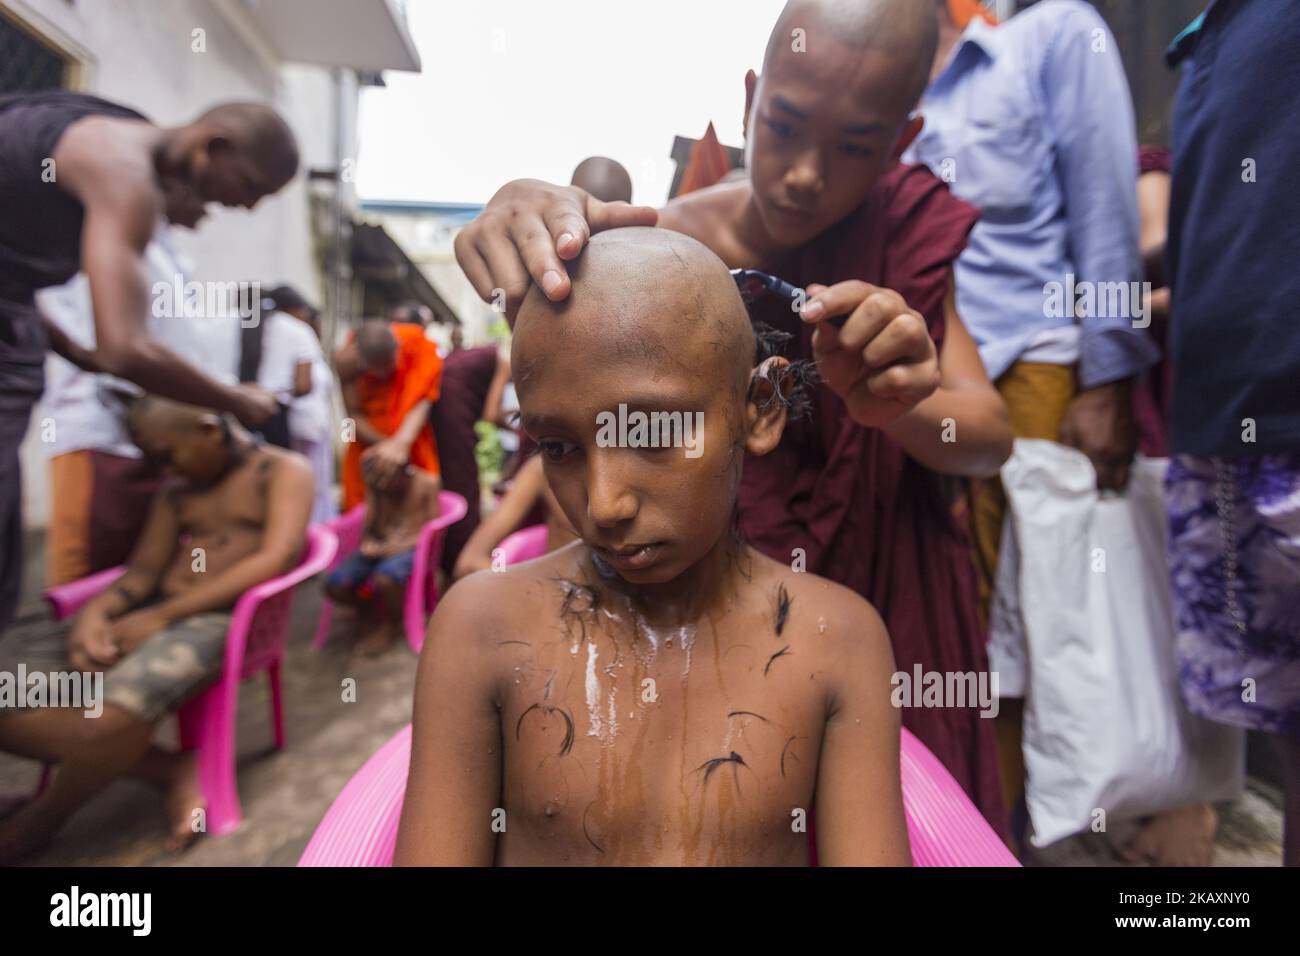 A Buddhist monk shaves the head of a Sri Lankan boy during a ceremony to be ordained as novice Buddhist monks (samanera) in Colombo, Sri Lanka on Sunday 29 April 2018 which also marks the Vesak full moon poya day Celebrated by Buddhists to mark three momentous events in Lord Buddha's life – his birth, enlightenment, and his departure from the human world. (Photo by Tharaka Basnayaka/NurPhoto) Stock Photo